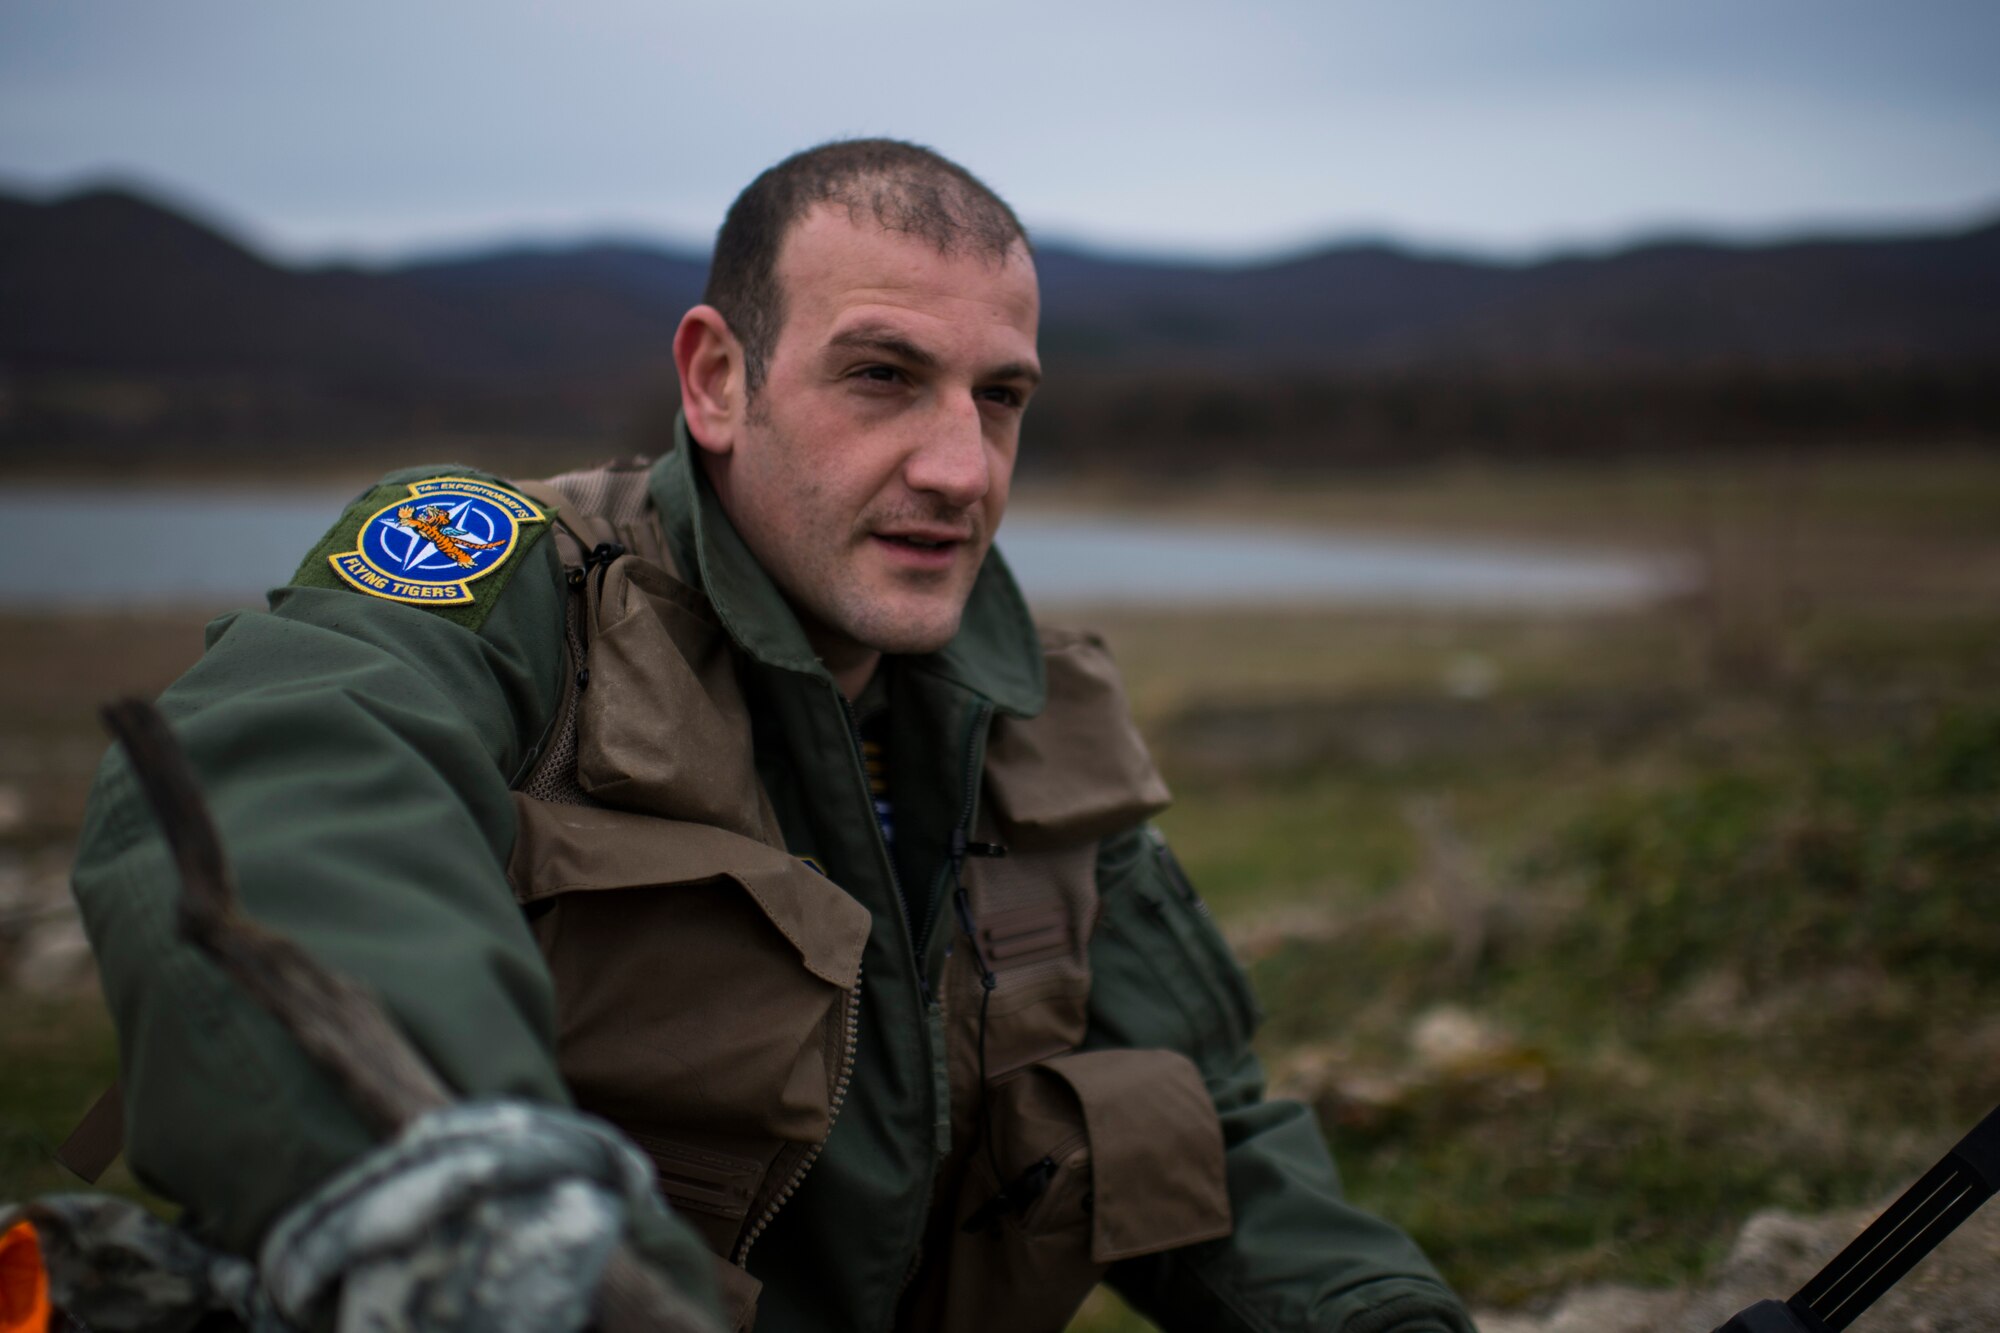 PLOVDIV, Bulgaria - Italian air force Captain Roberto Manzo, a 74th Expeditionary Fighter Squadron A-10C Thunderbolt II aircraft exchange pilot, looks off into the distance during combat search and rescue training near Plovdiv, Bulgaria, Feb. 11, 2016. Manzo is part of a pilot exchange program allowing him to train as an A-10 pilot with the 74th EFS, assigned to the 23rd Wing at Moody Air Force Base, Ga. (U.S. Air Force photo by Airman 1st Class Luke Kitterman/Released)